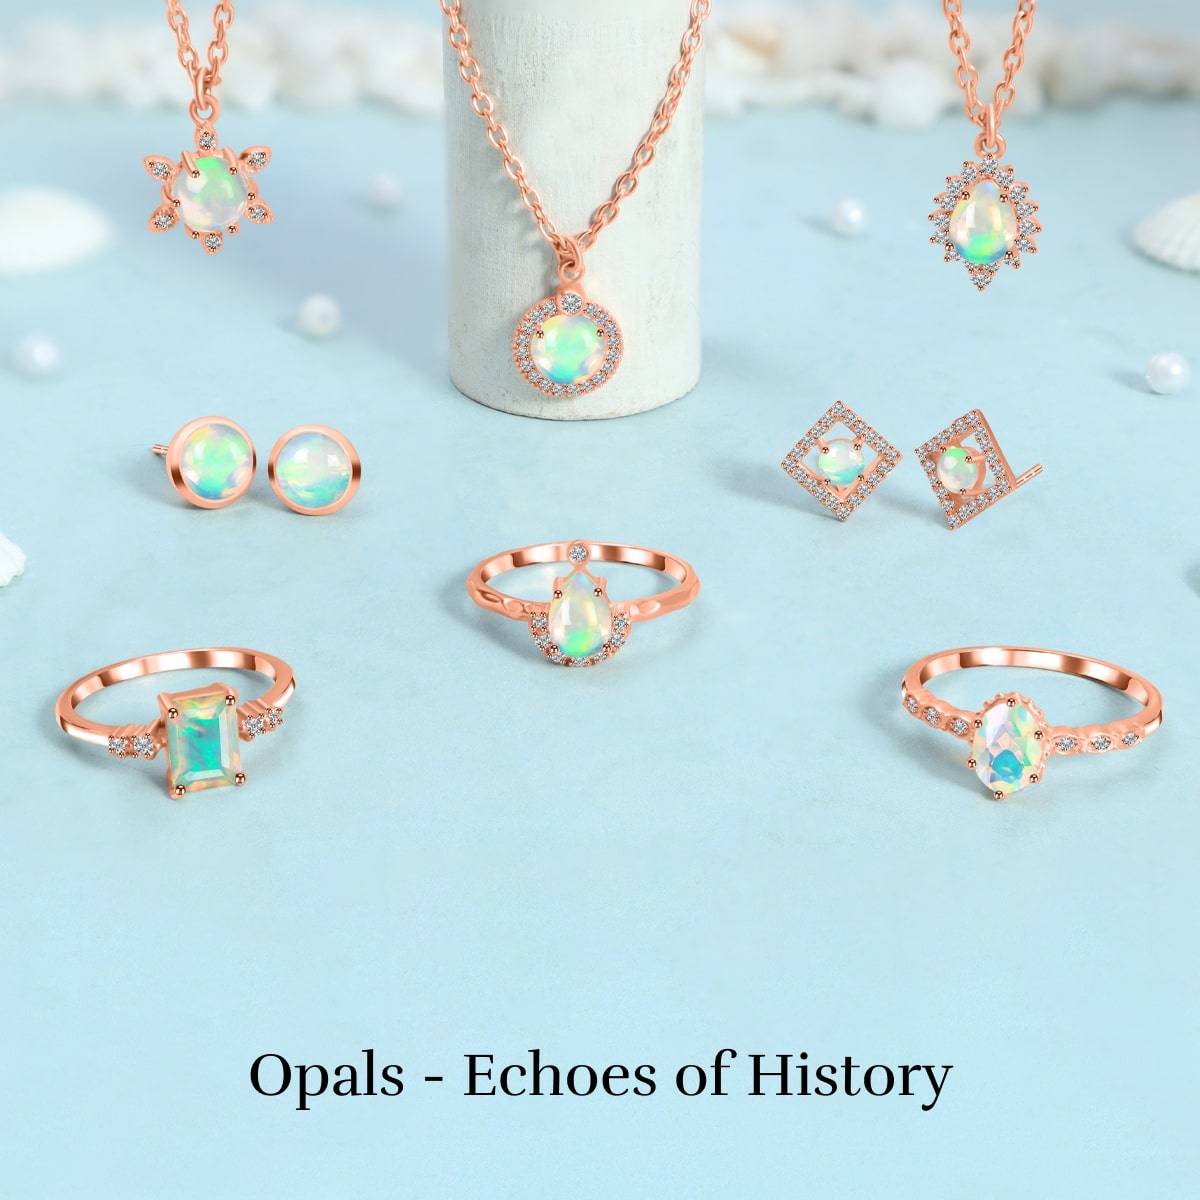 History of Opals